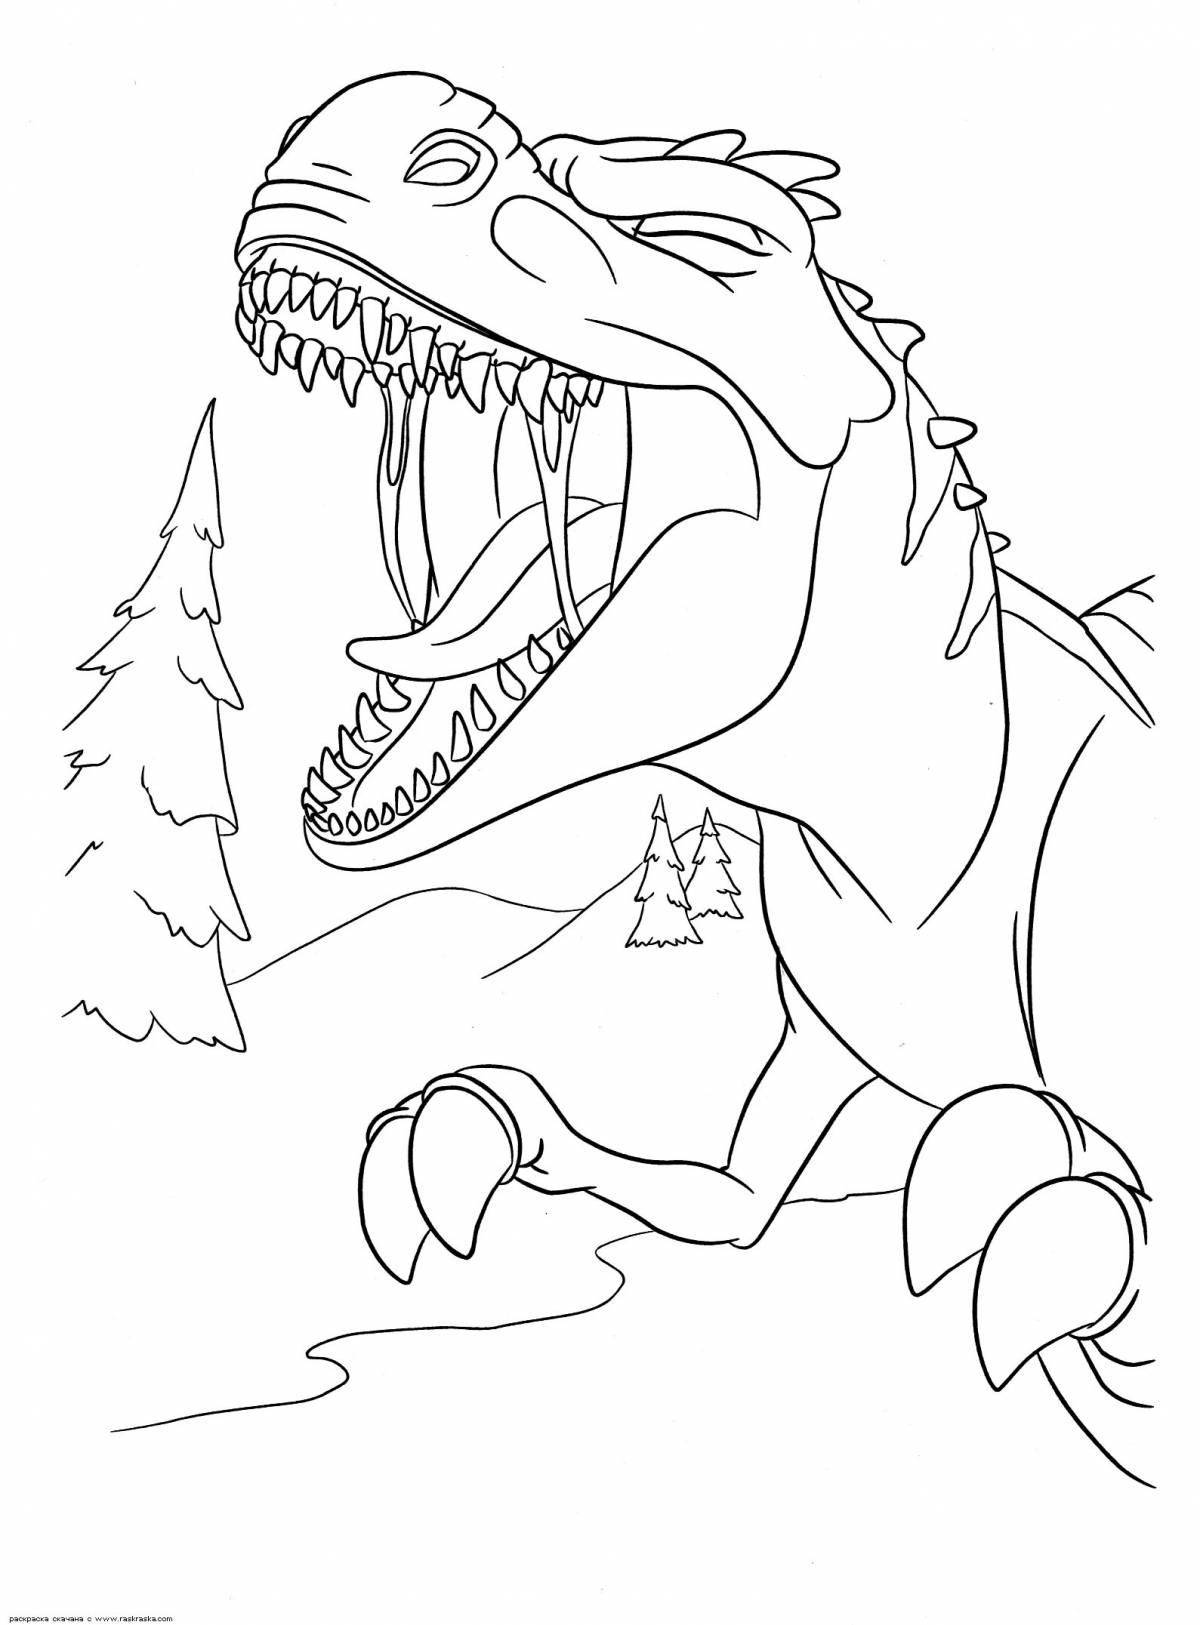 Delicate ice age 3 coloring page